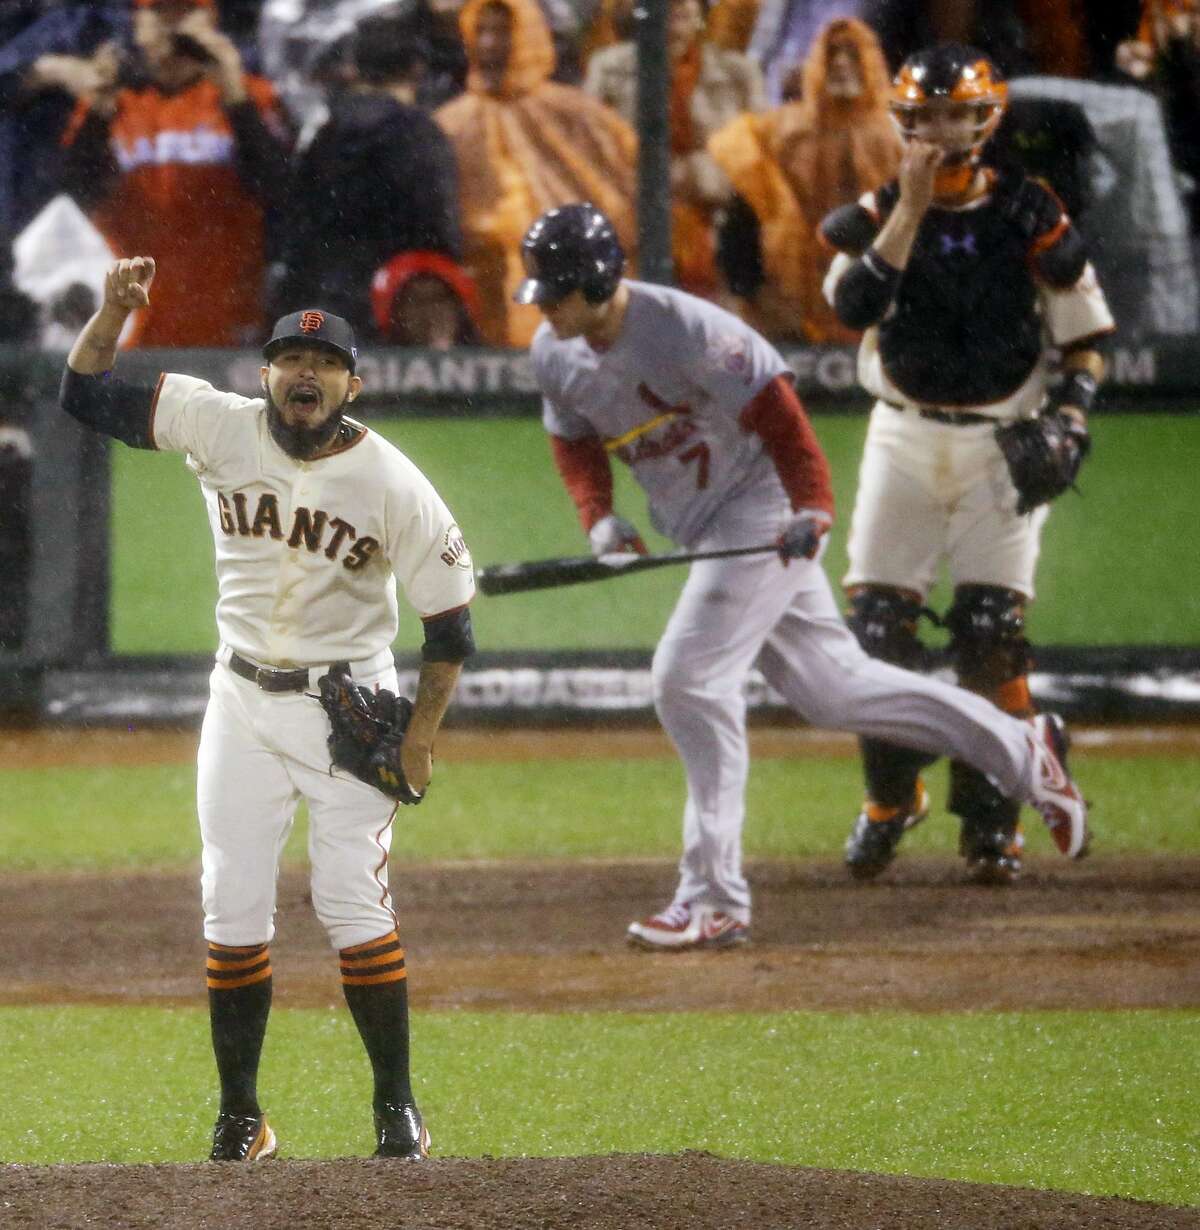 San Francisco Giants relief pitcher Sergio Romo reacts after St. Louis Cardinals' Matt Holliday flies out to end Game 7 of baseball's National League championship series against the St. Louis Cardinals Monday, Oct. 22, 2012, in San Francisco. The Giants won 9-0 to win the series. (AP Photo/Mark Humphrey)